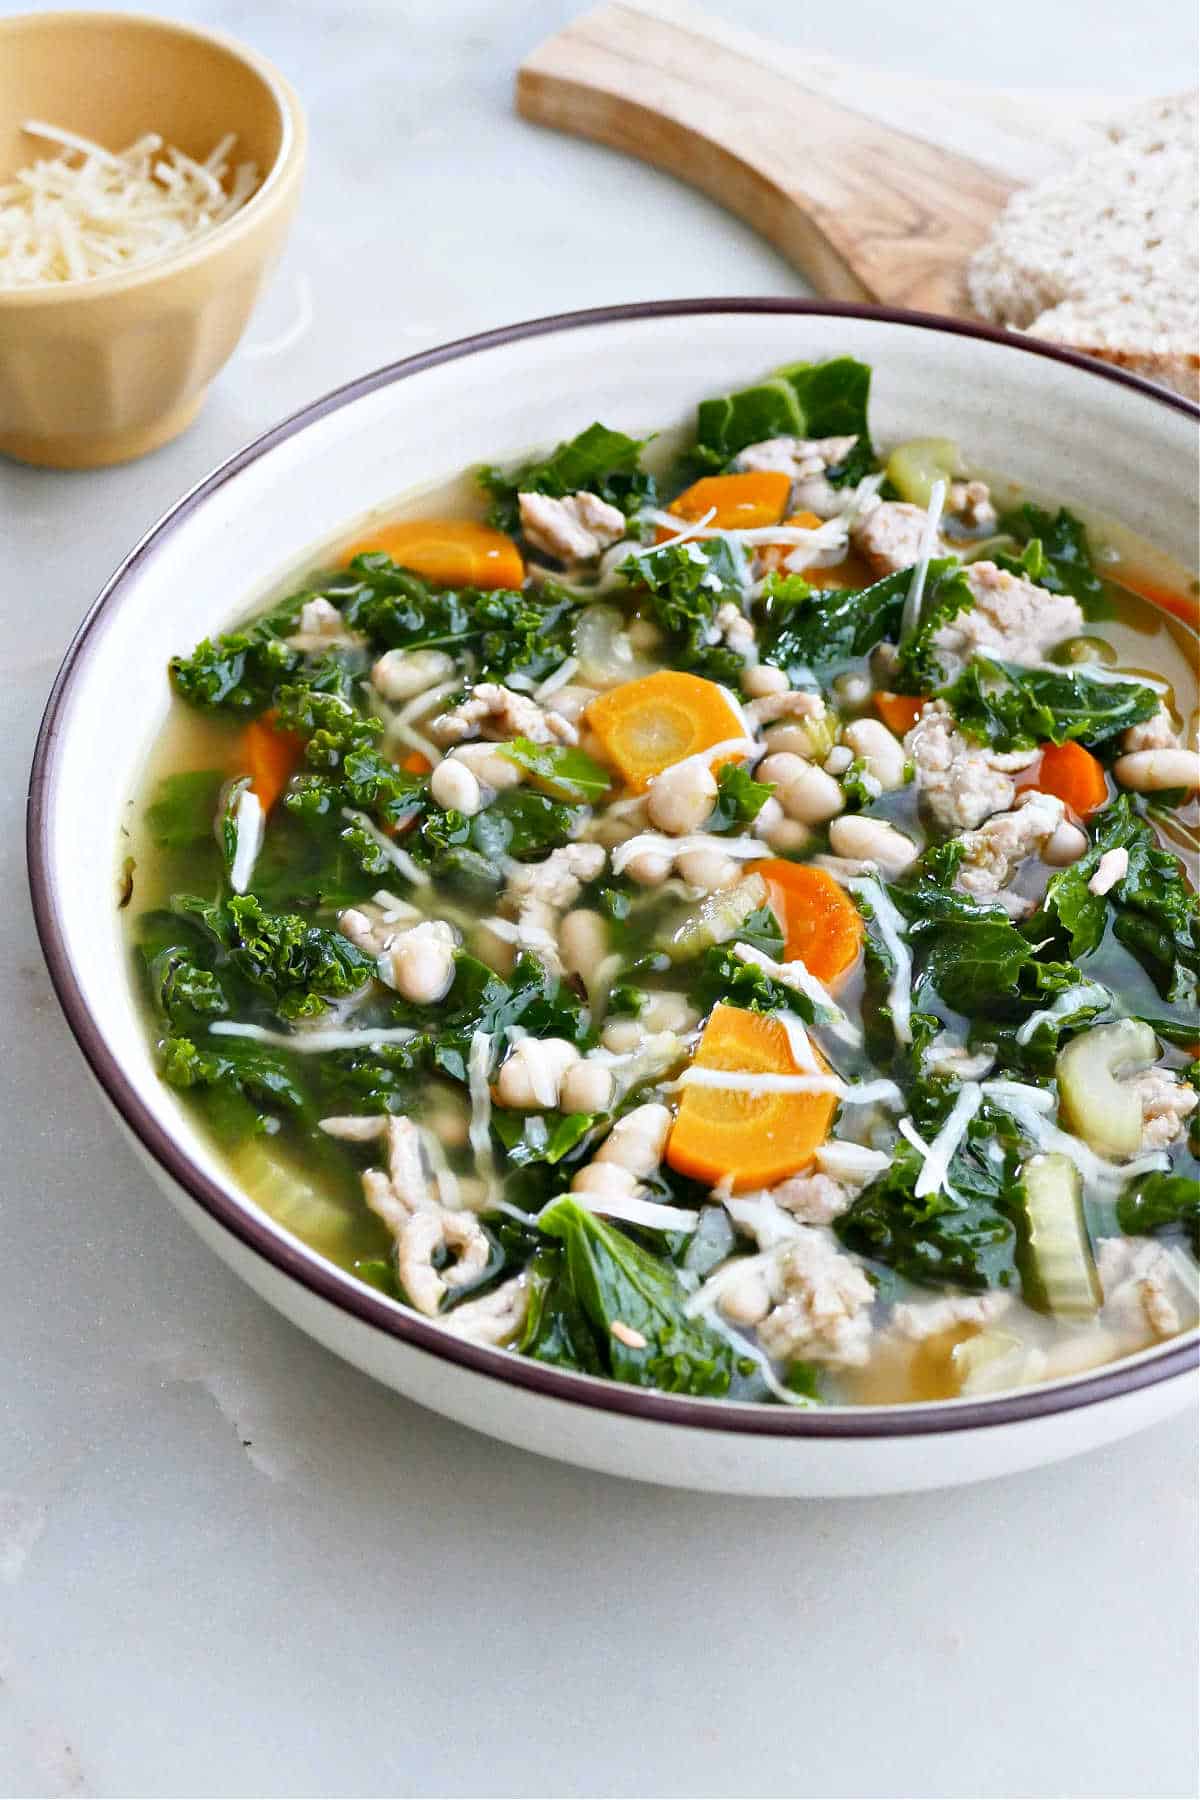 Easy and delicious slow cooker kale and white bean soup with sausage. Gluten-free and filled with vegetables!